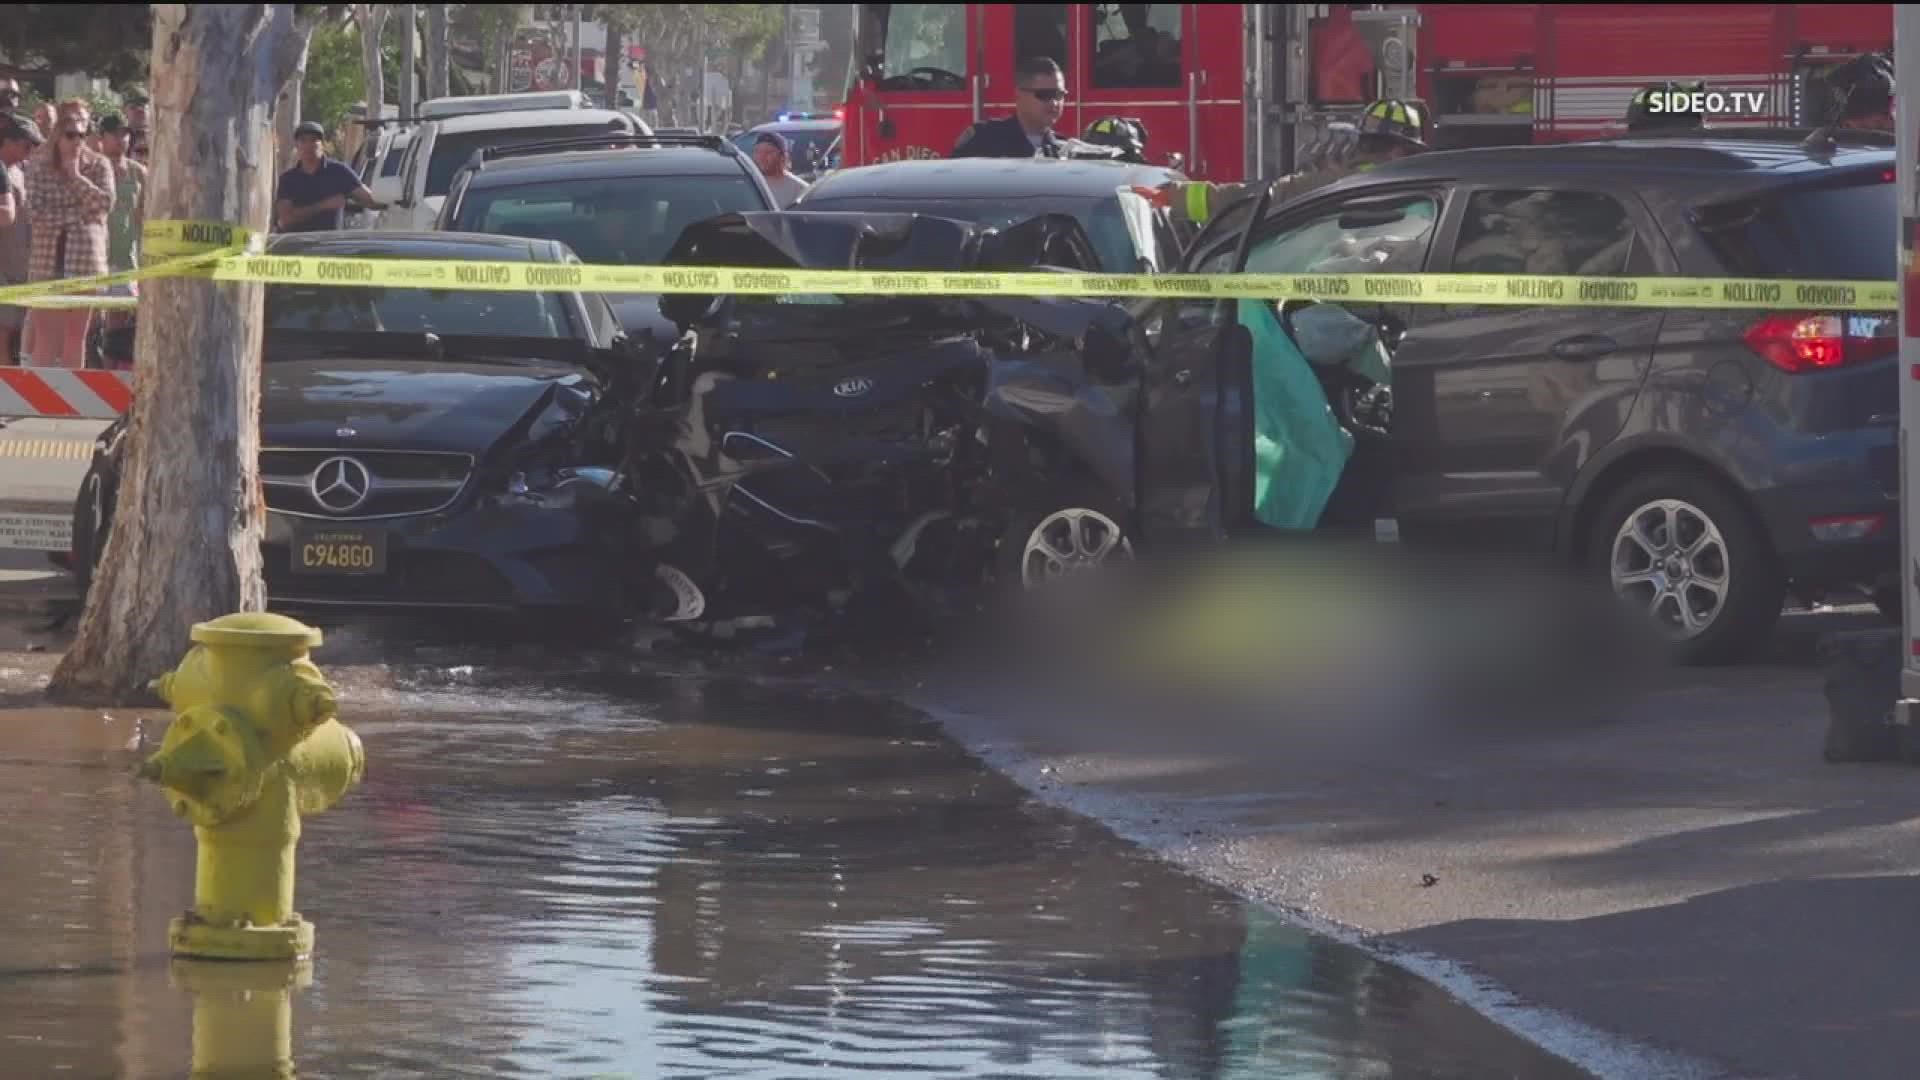 Two people were killed, and at least five other people were seriously hurt after being involved in a car crash in Mission Beach.